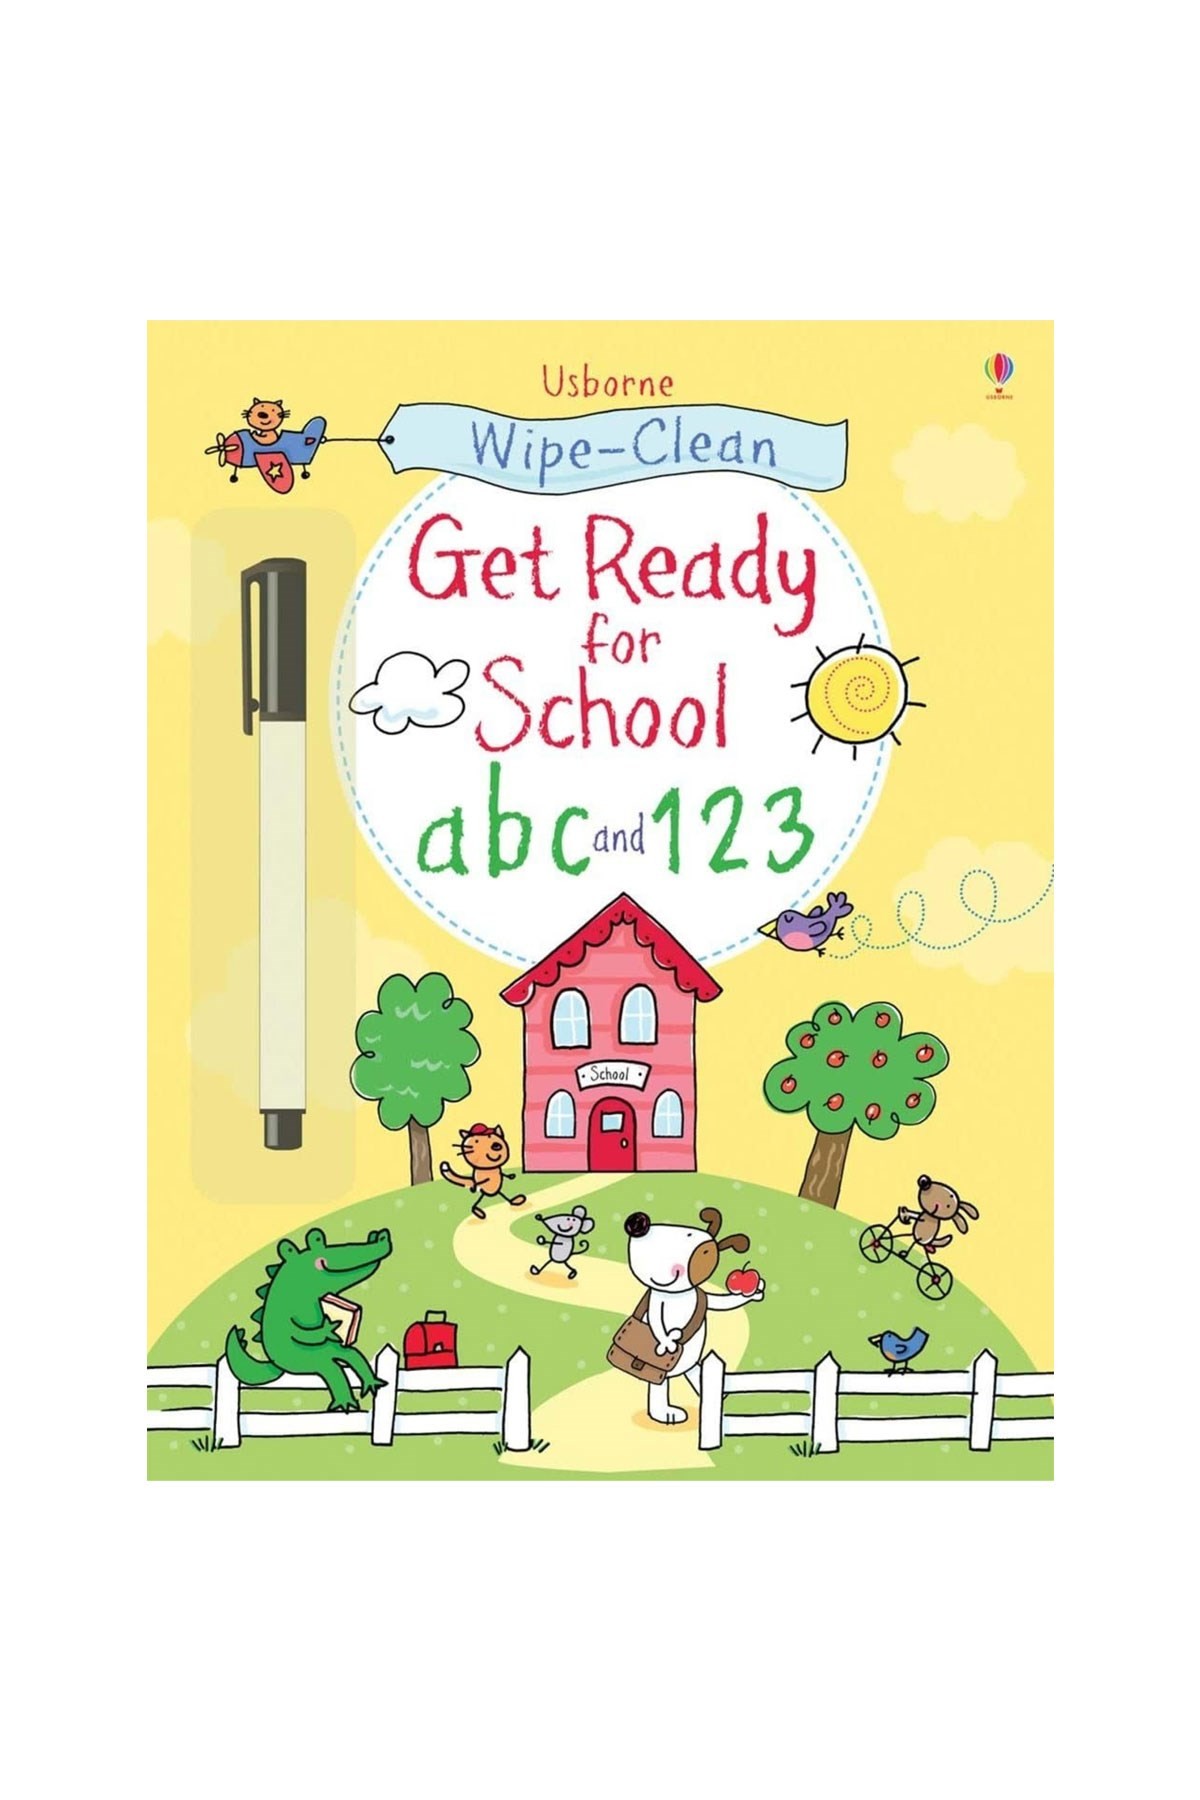 The Usborne Wipe-Clean Get Ready for School ABC And 123